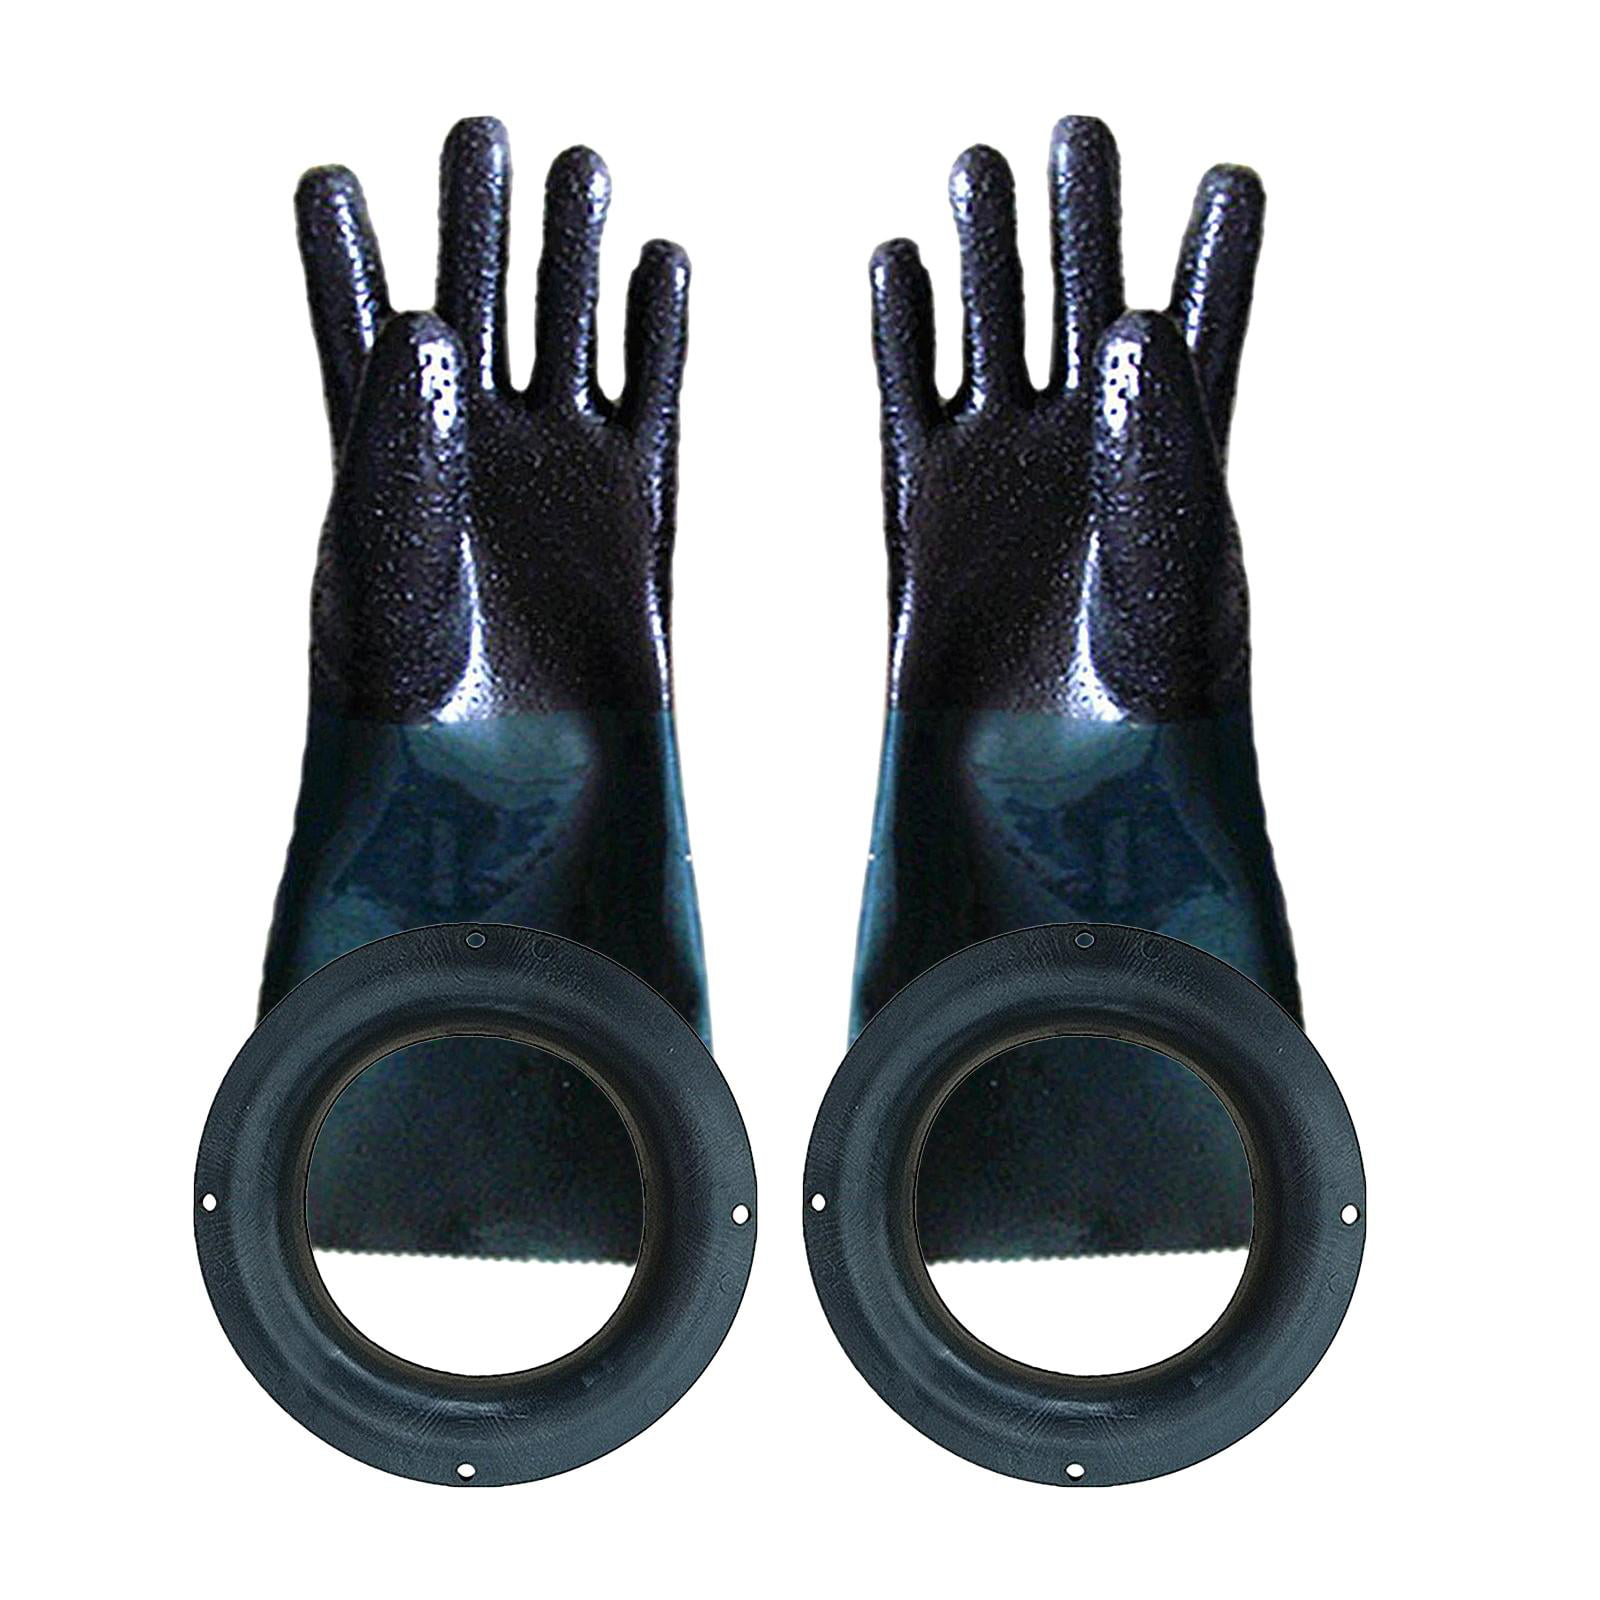 Heavy Duty Sand-Blaster Gloves Work Cleaning Cabinet Parts Industrial Gloves 